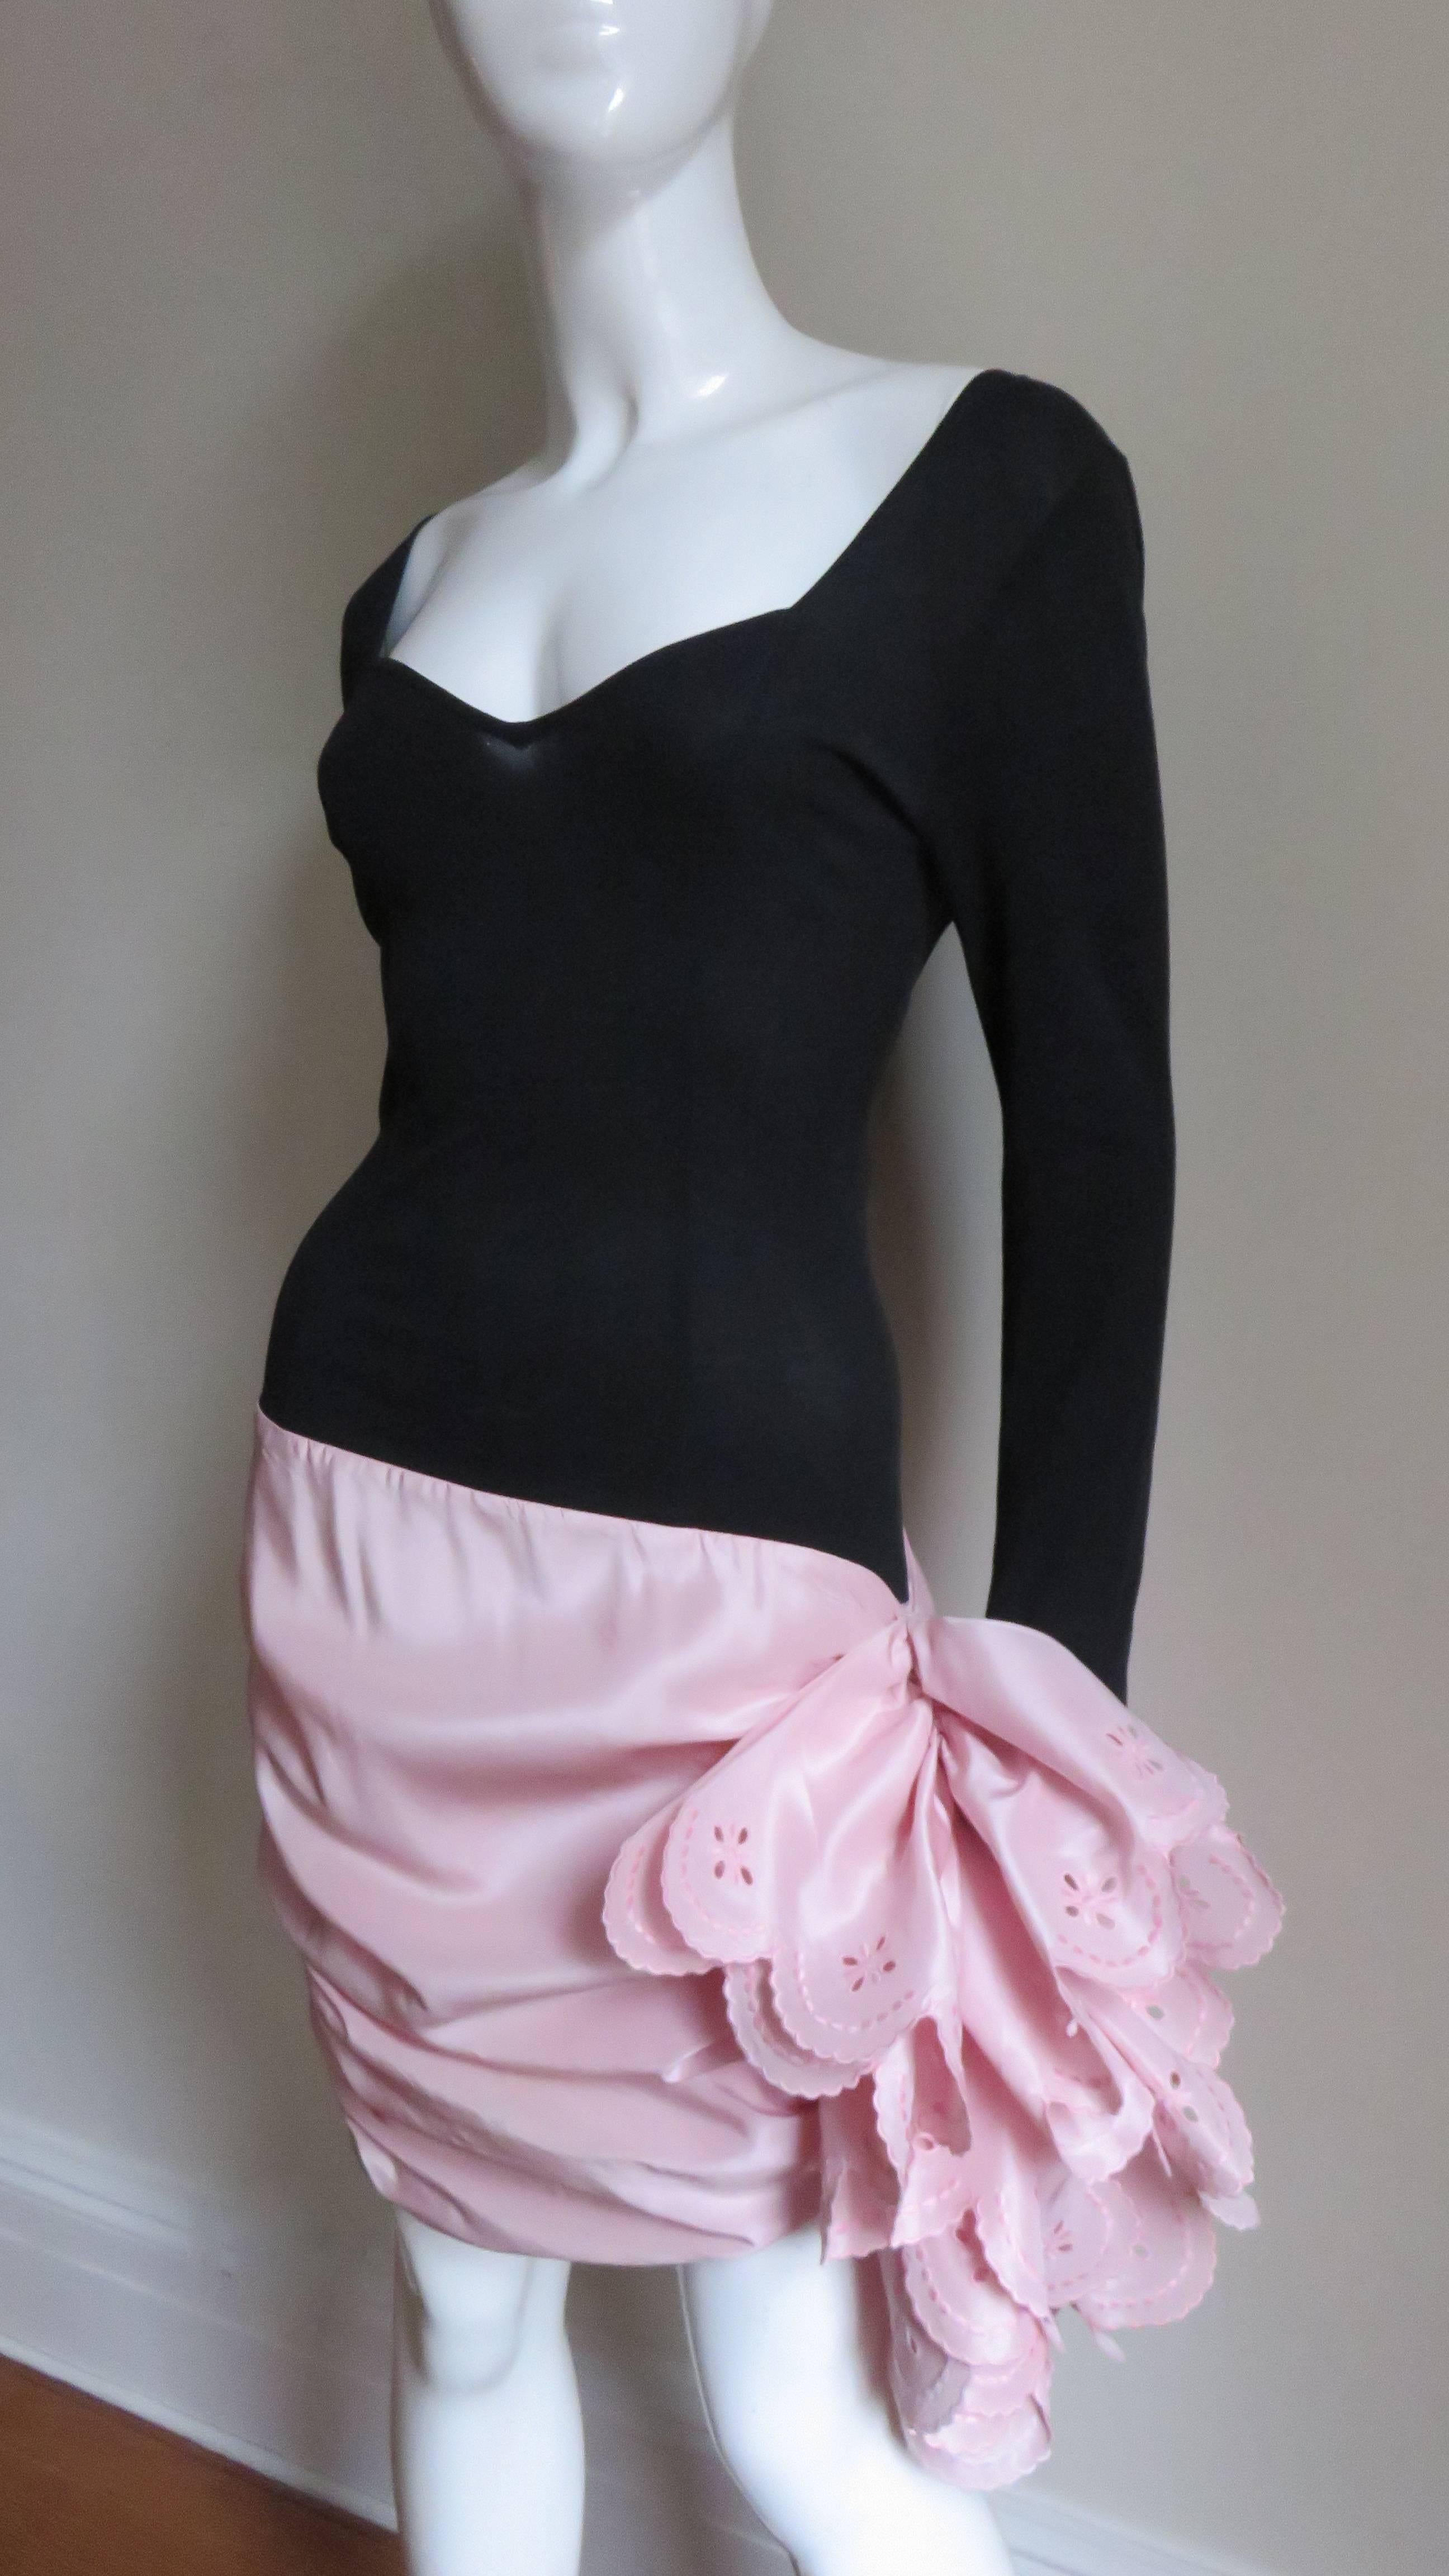 A great black jersey dress with a pink silk skirt from Angelo Tarlazzi.  It has long sleeves with a princess seaming and sweetheart neckline. The pink skirt portion has horizontal ruching  with rows of scallop edge ruffles along one side.  The skirt